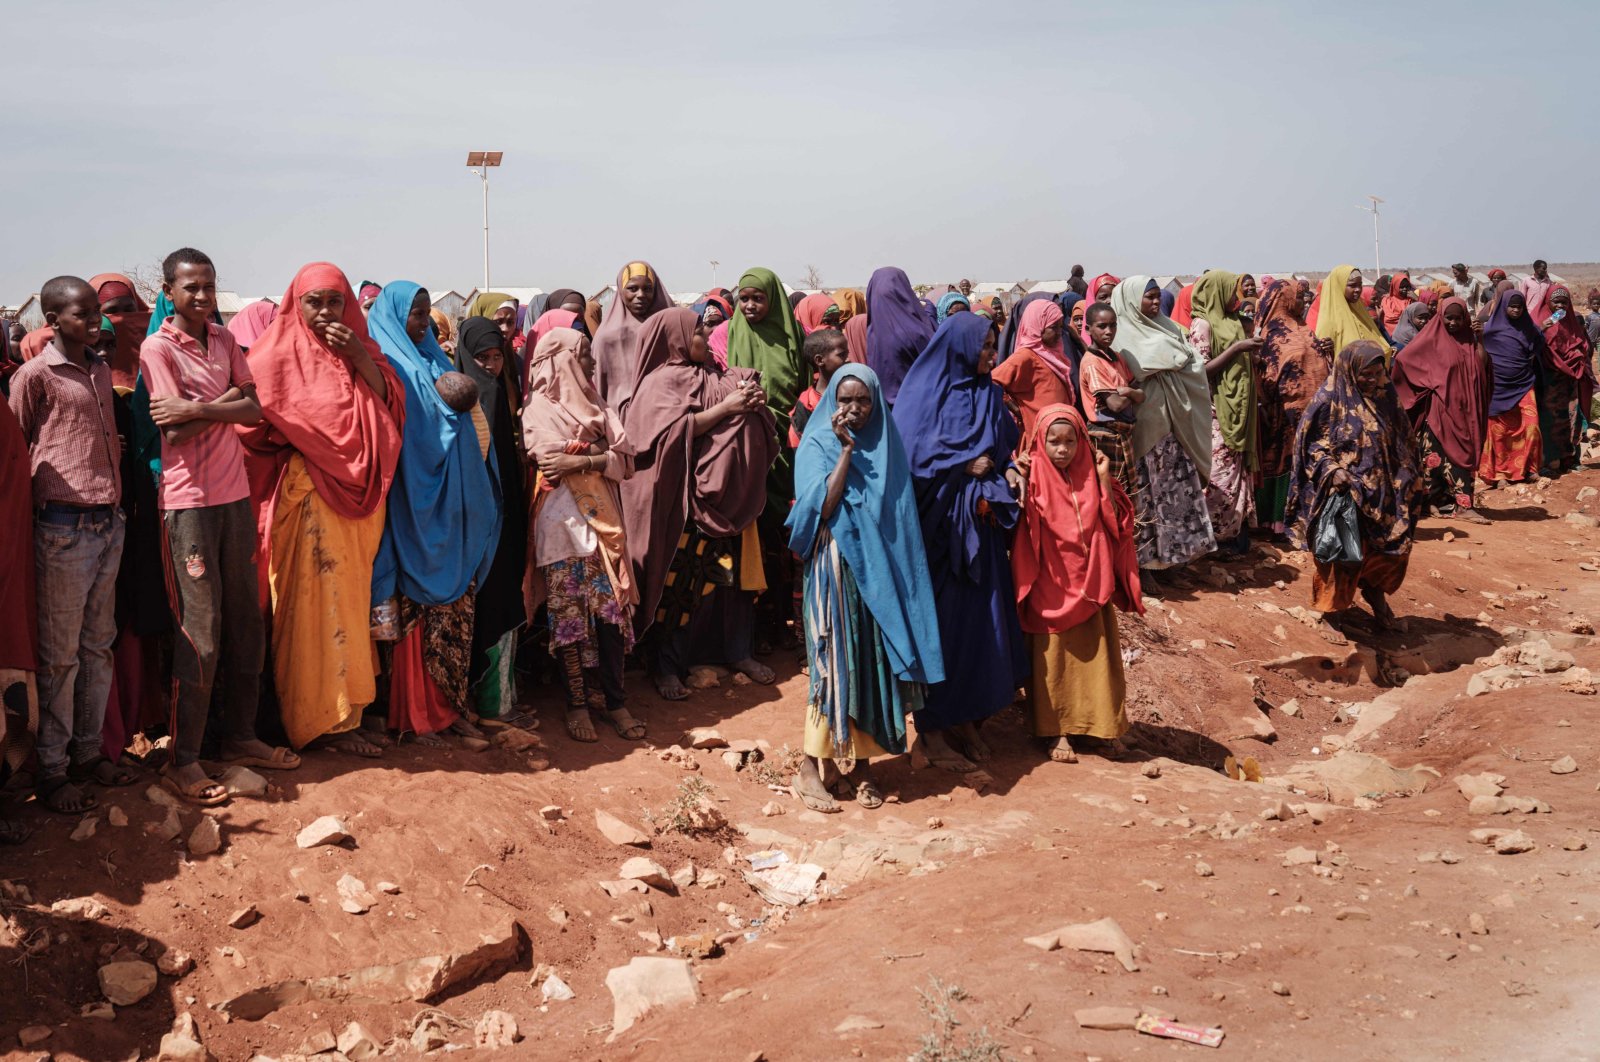 13 million are facing severe famine as a result of the drought